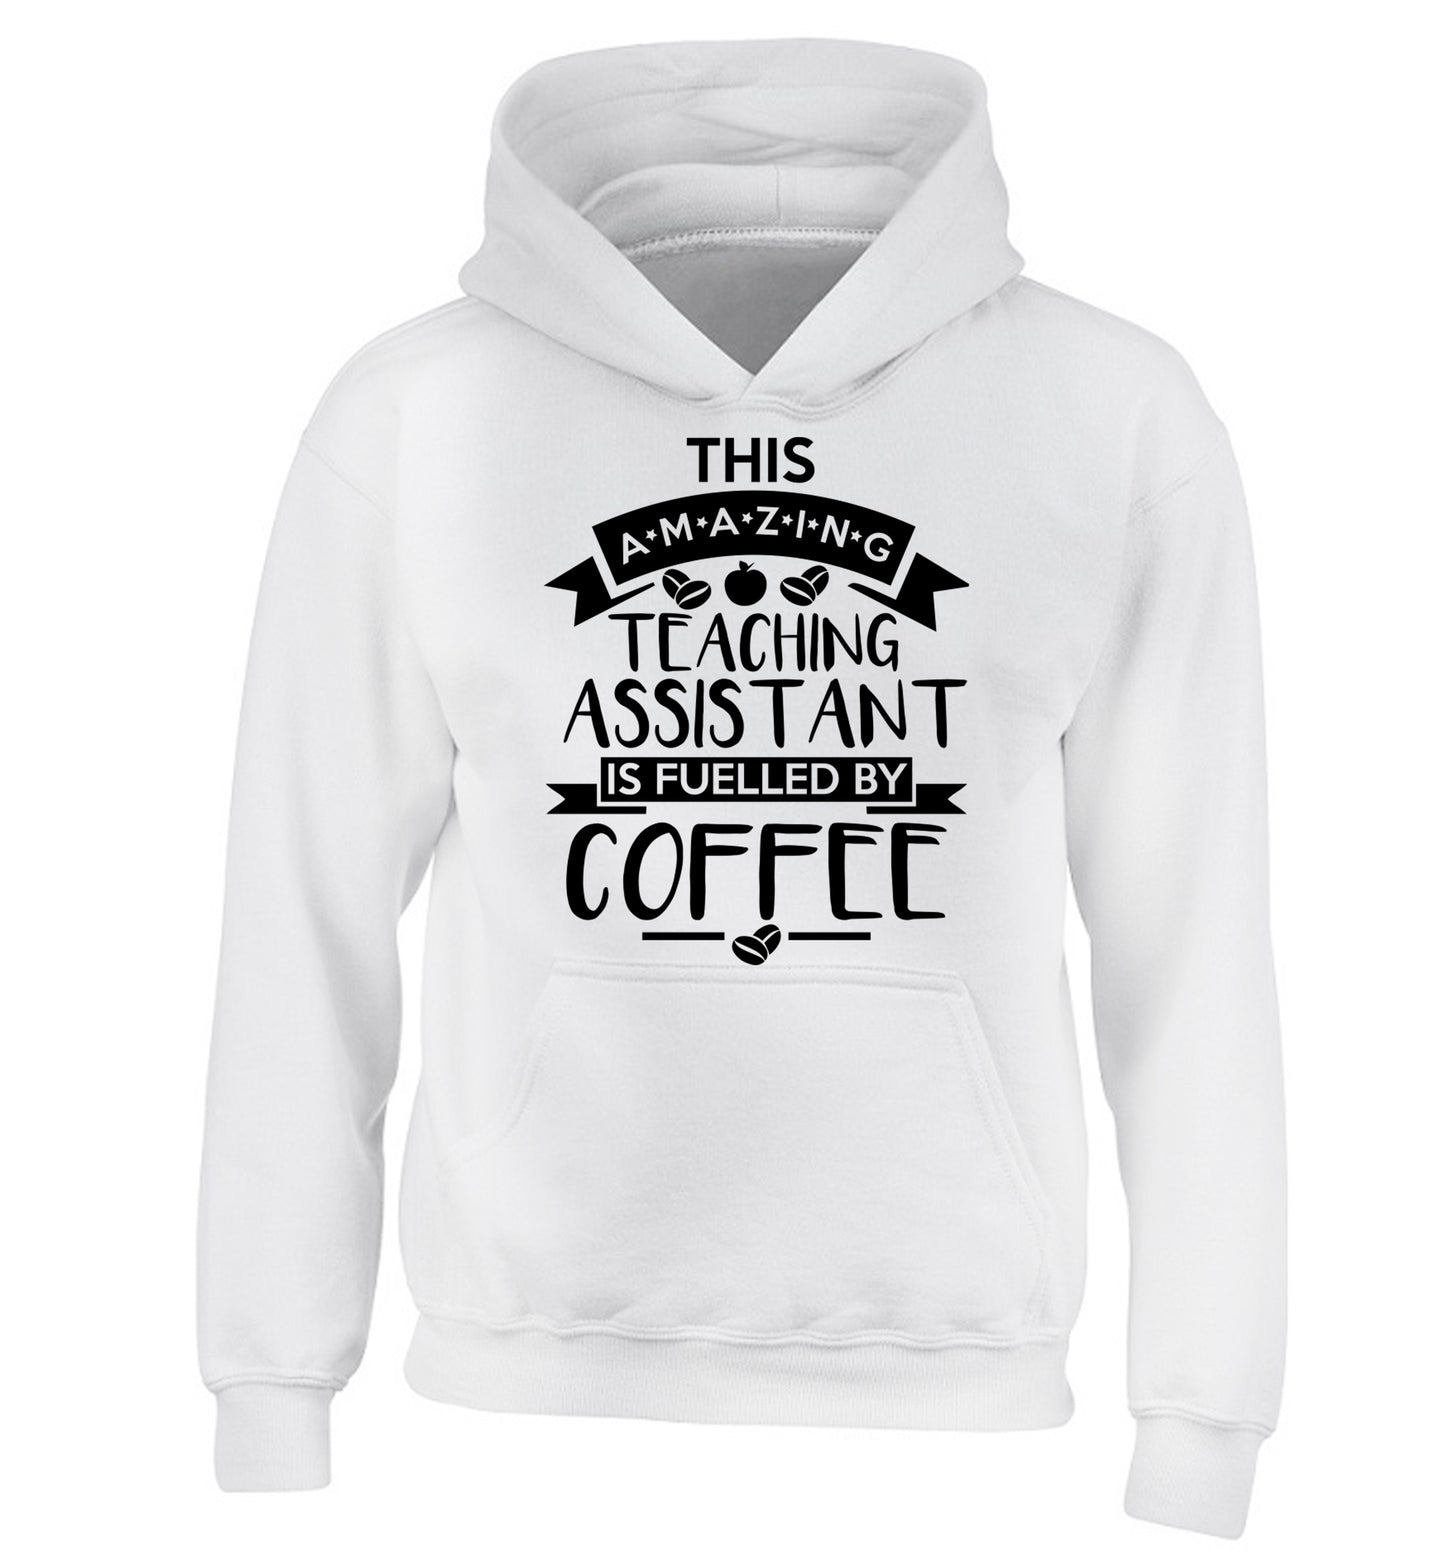 This amazing teaching assistant is fuelled by coffee children's white hoodie 12-13 Years